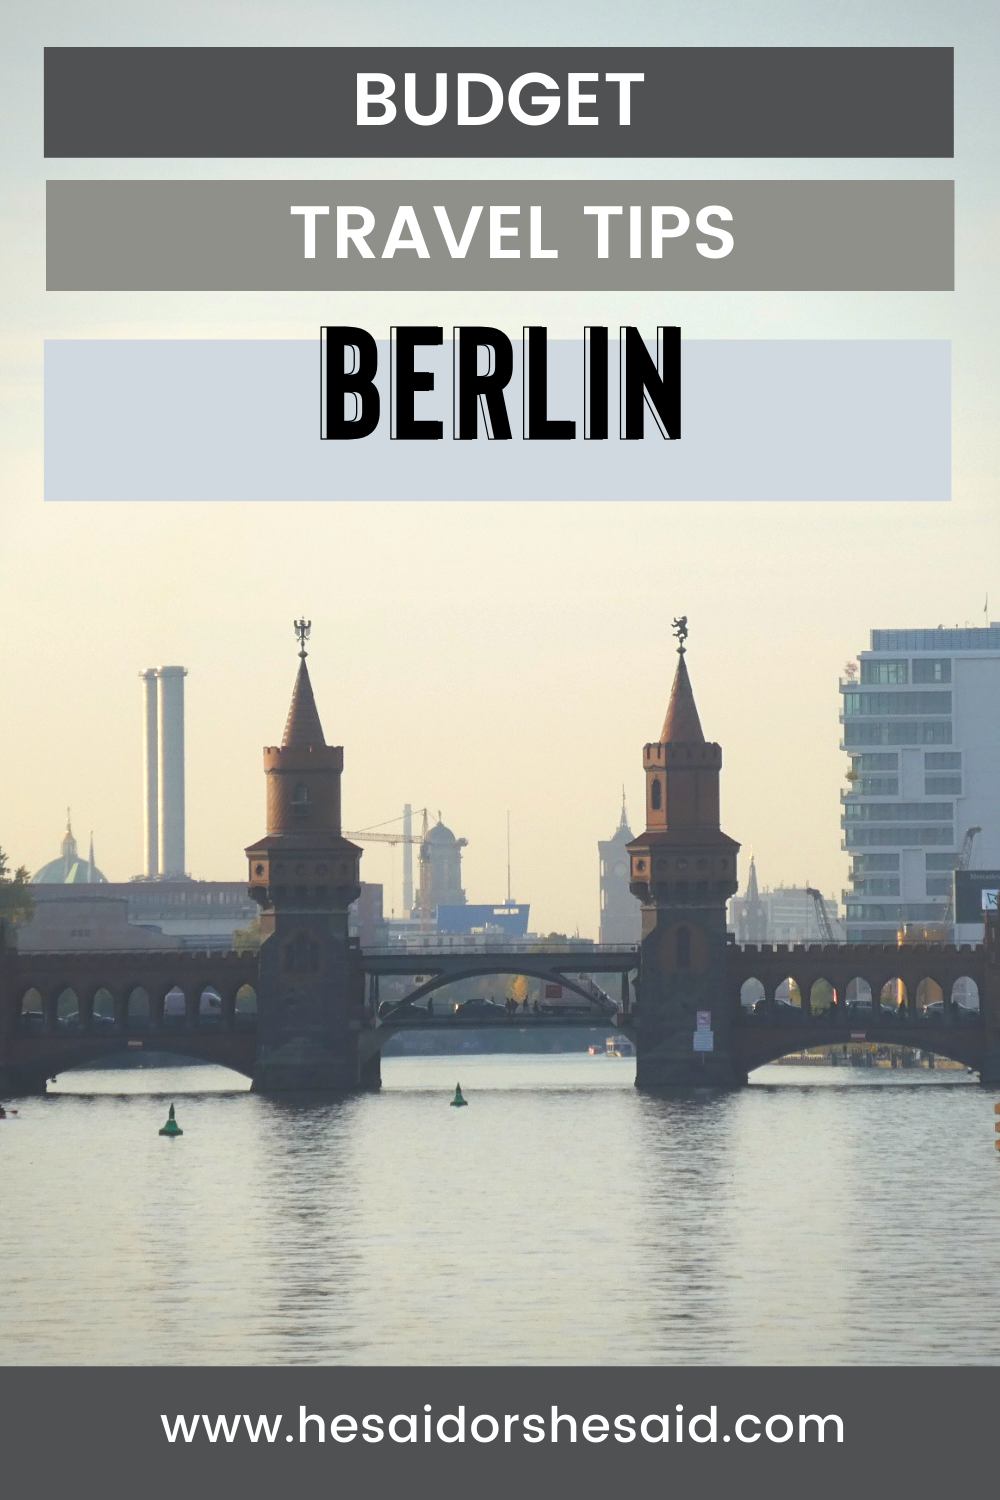 Budget travel tips for Berlin by hesaidorshesaid